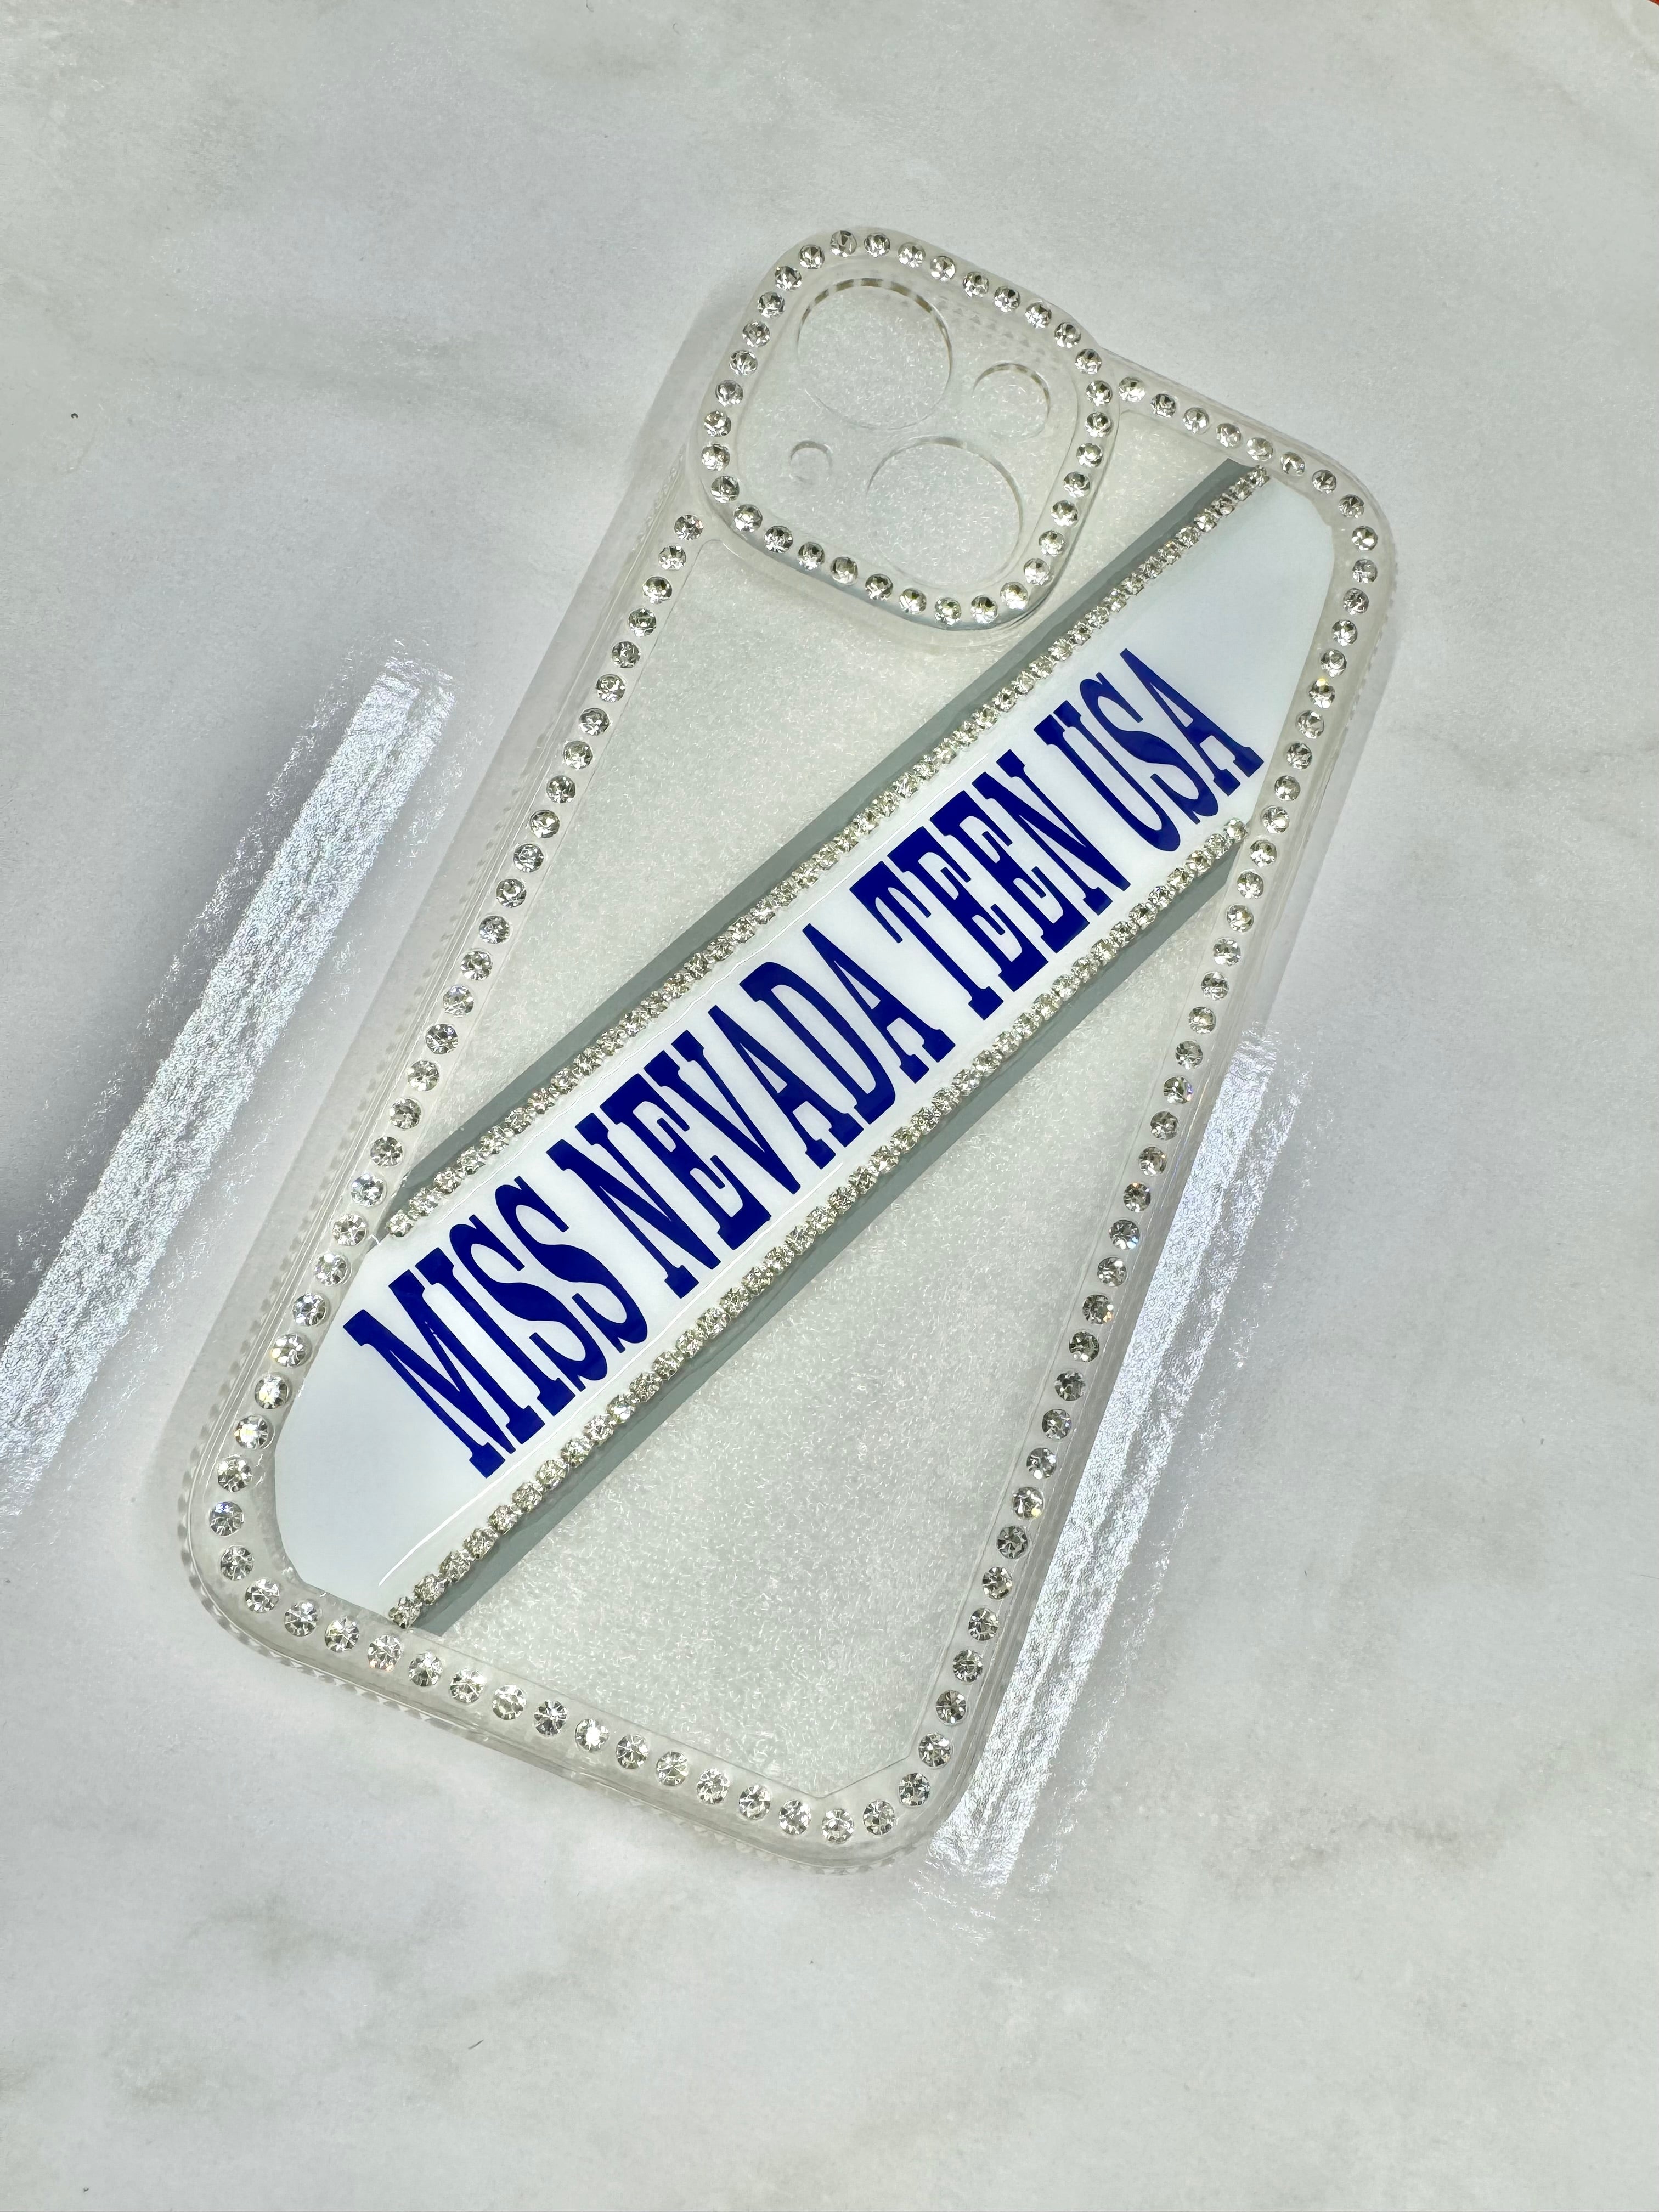 Miss USA Title Phone Case